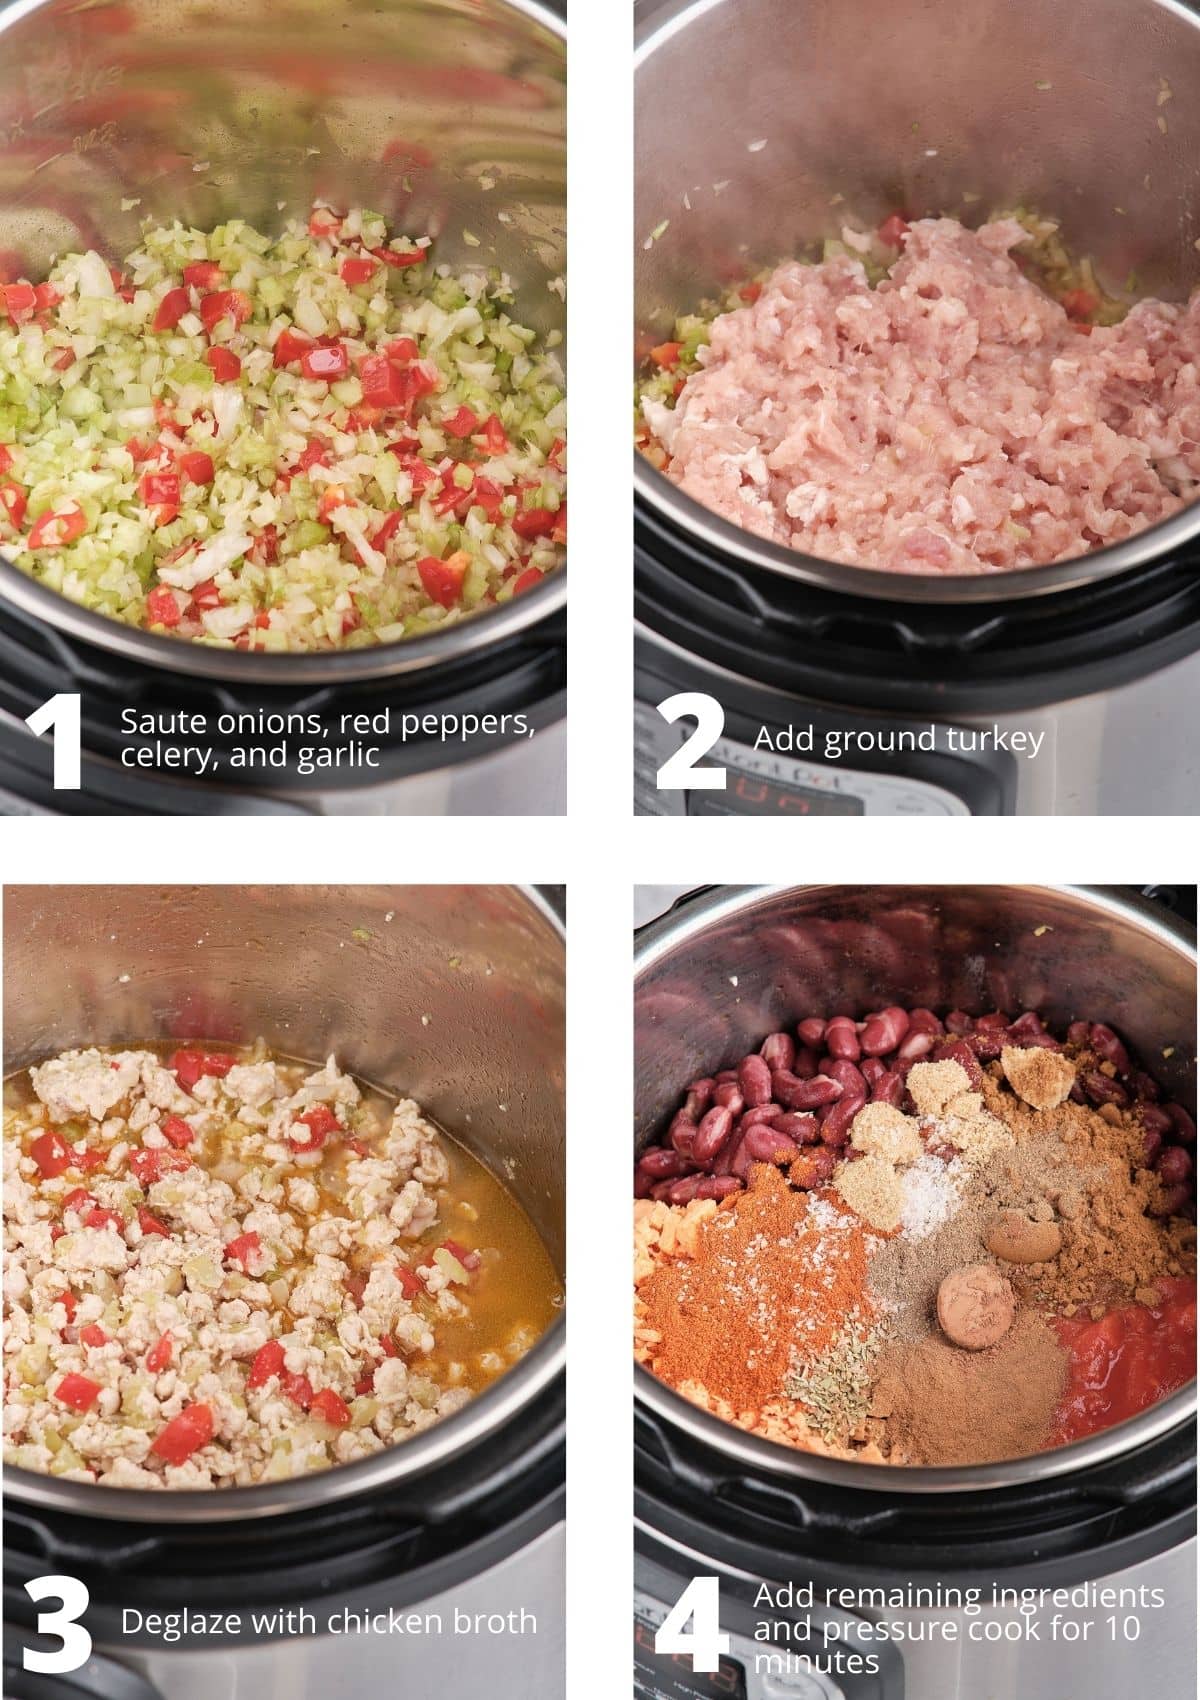 steps to make turkey chili in the instant pot: sauté vegetables, brown the ground turkey, deglaze pot with chicken broth, and add remaining ingredients.